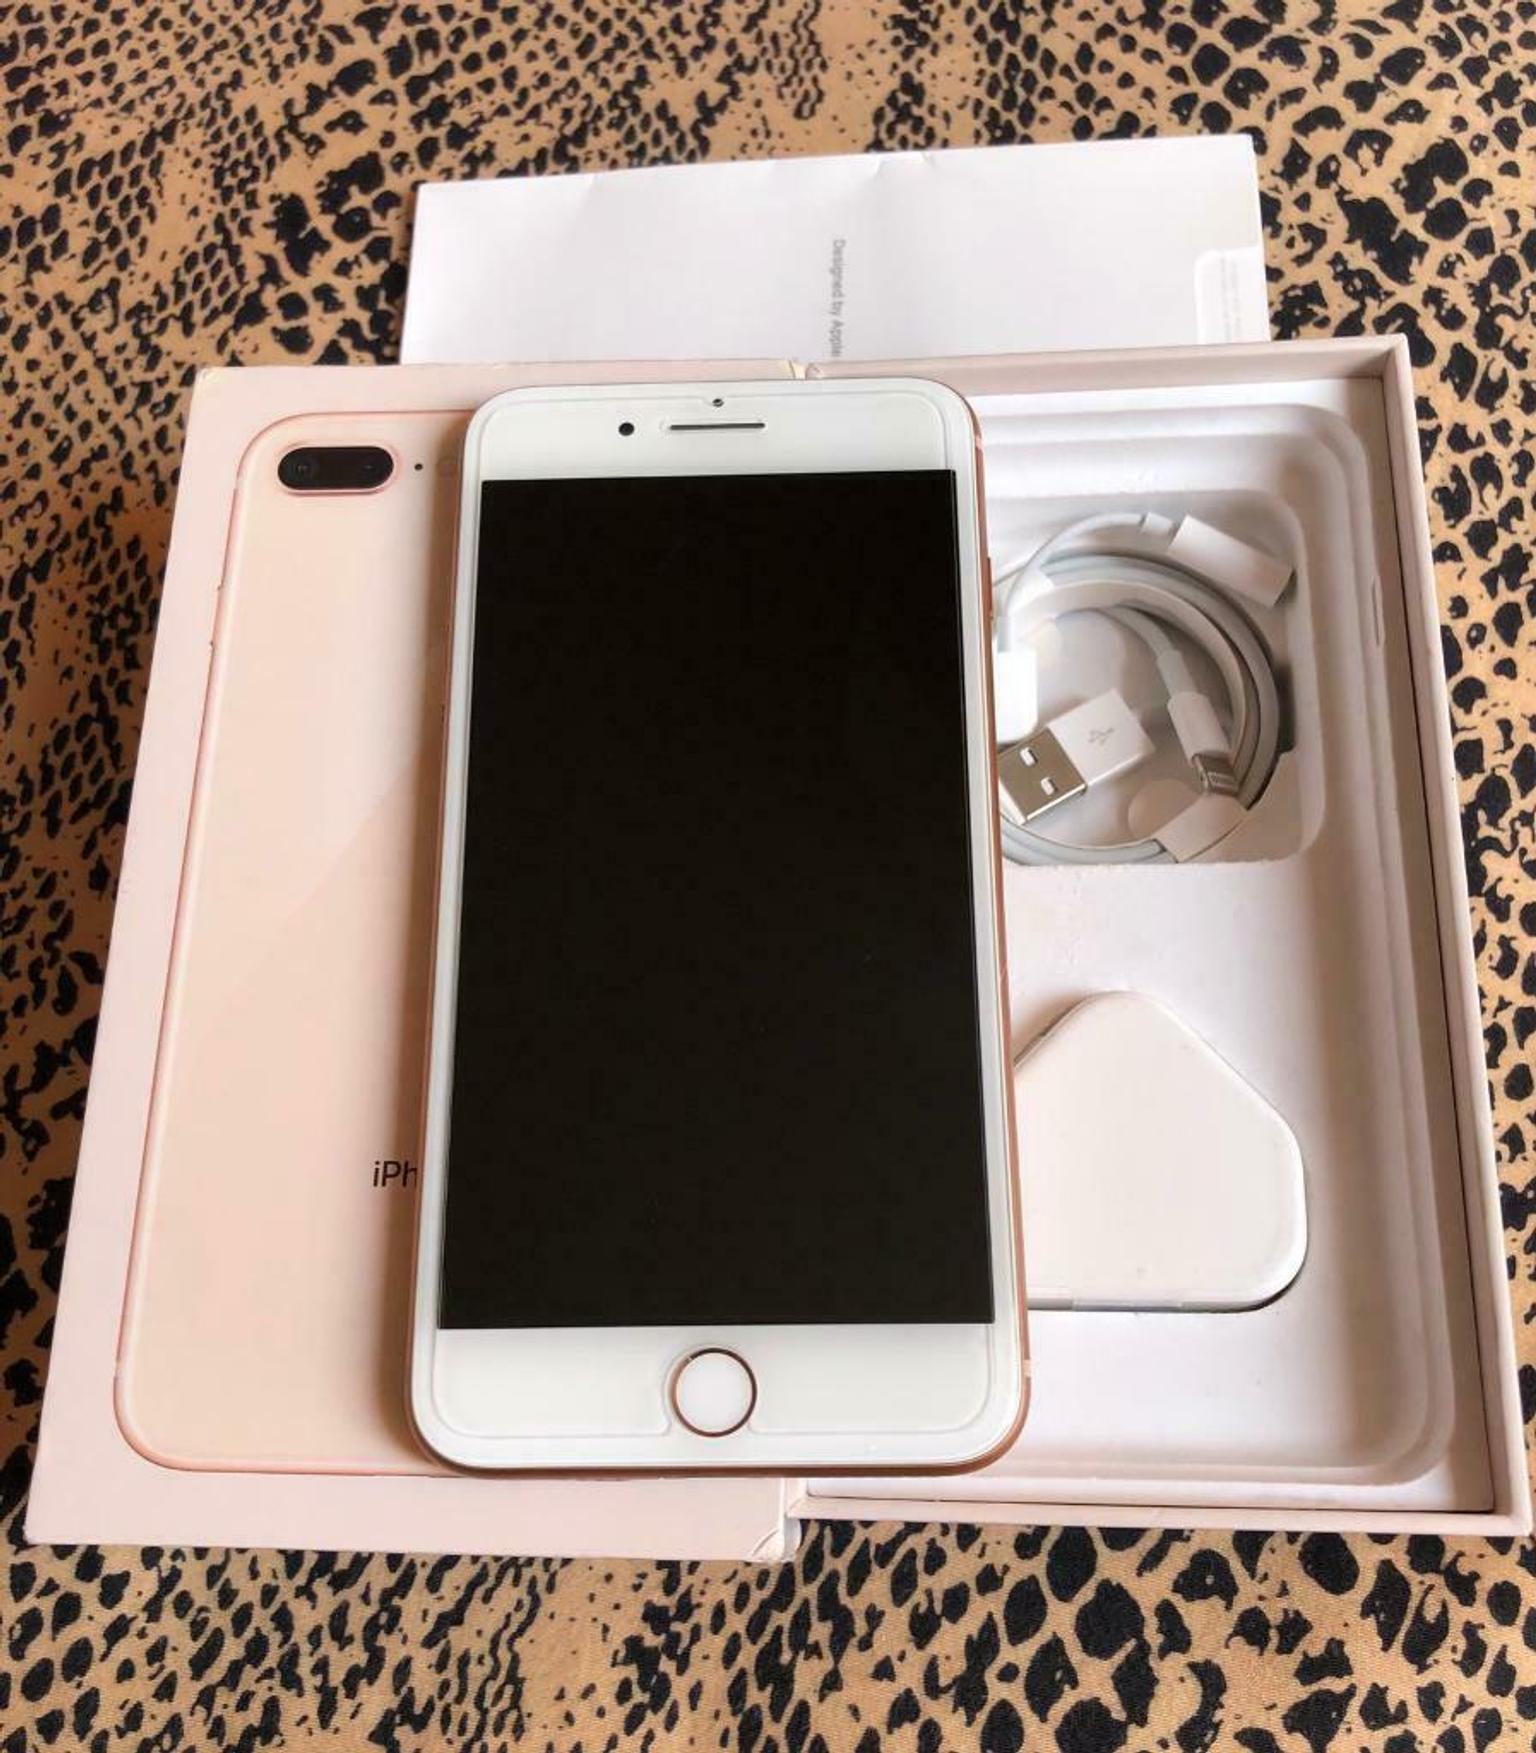 iPhone 8 Plus Gold 128GB Unlocked in E15 London for £275.00 for sale